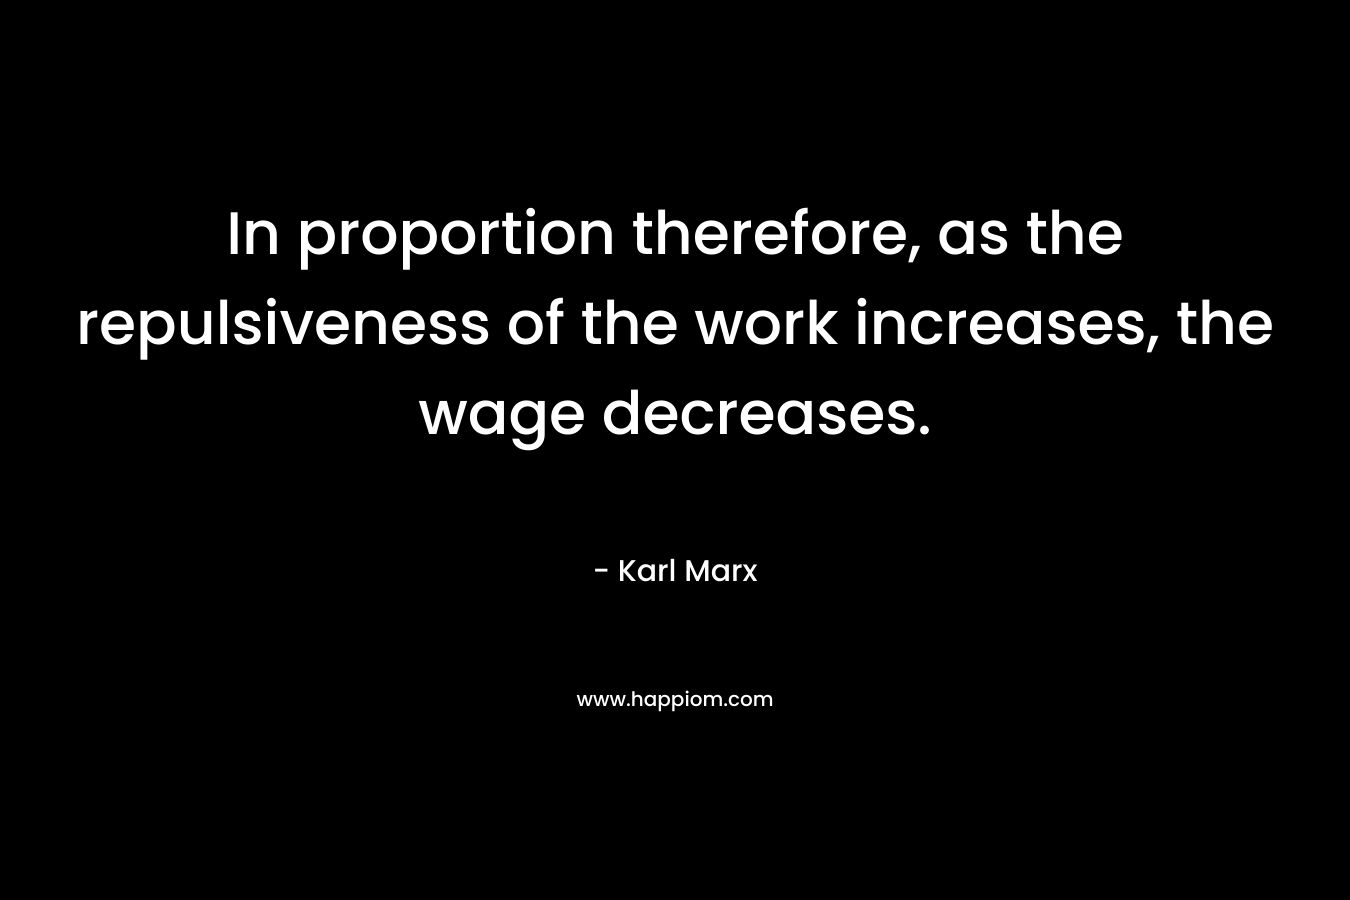 In proportion therefore, as the repulsiveness of the work increases, the wage decreases. – Karl Marx